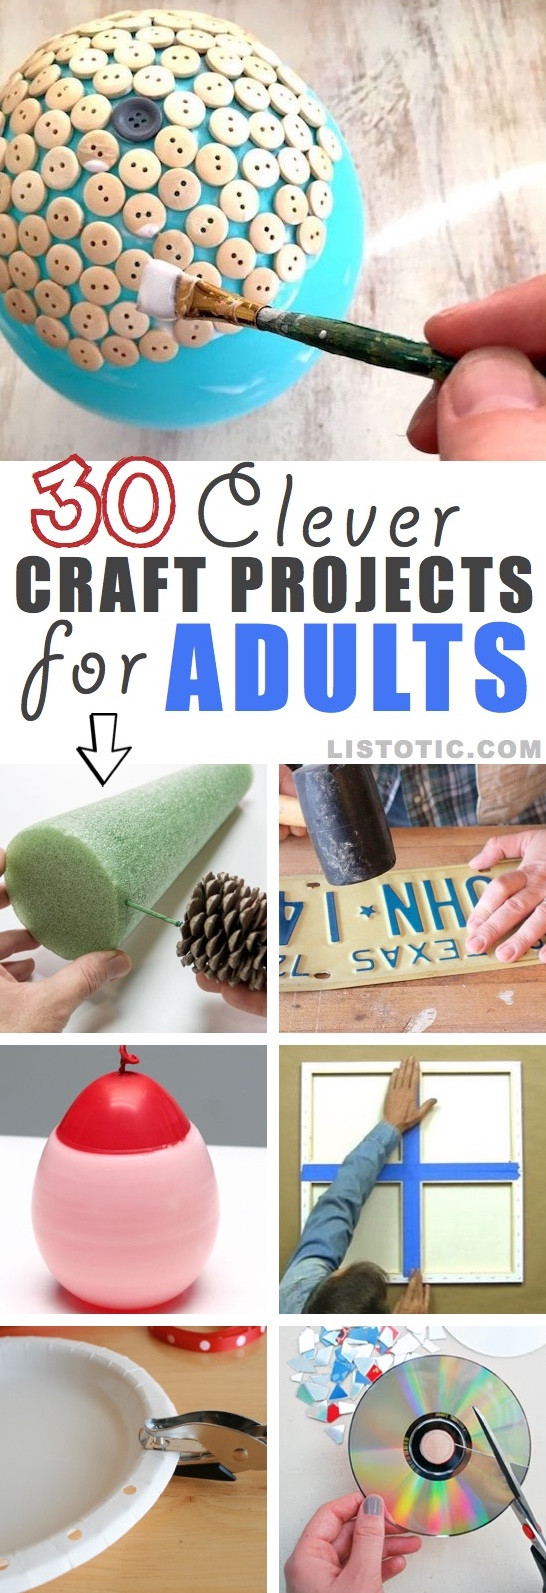 Craft Ideas For Adults
 Easy DIY Craft Ideas That Will Spark Your Creativity for